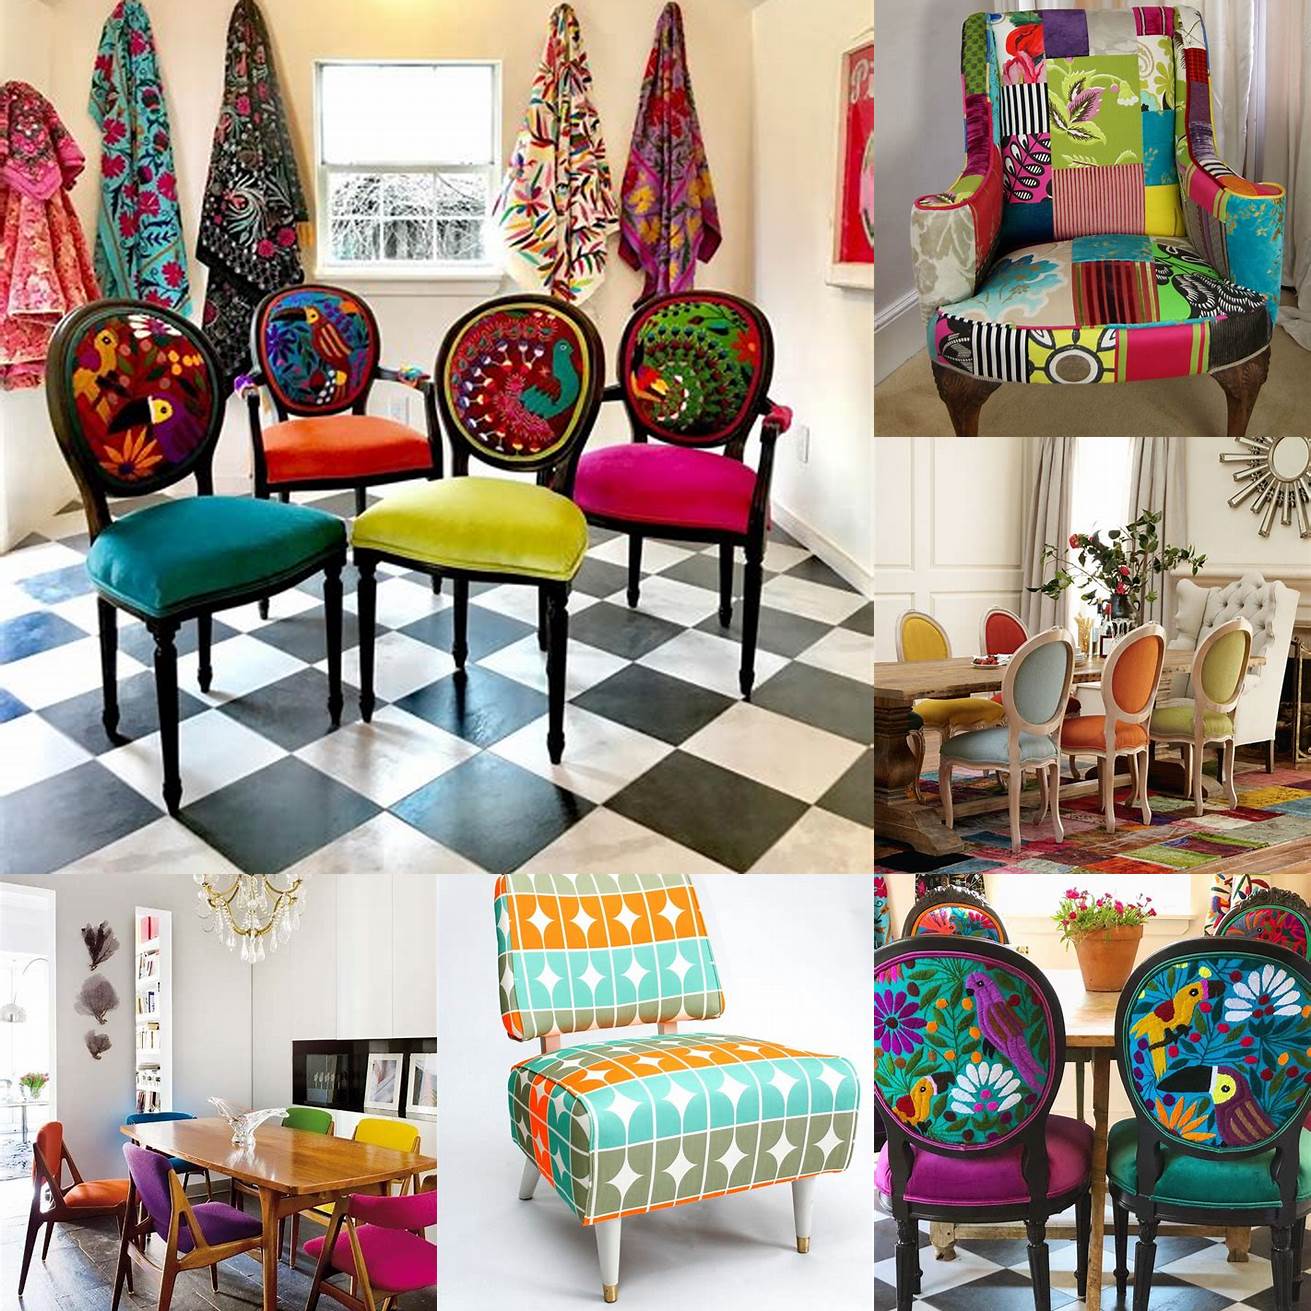 Funky chairs with playful shapes and colors can be a great addition to your dining area